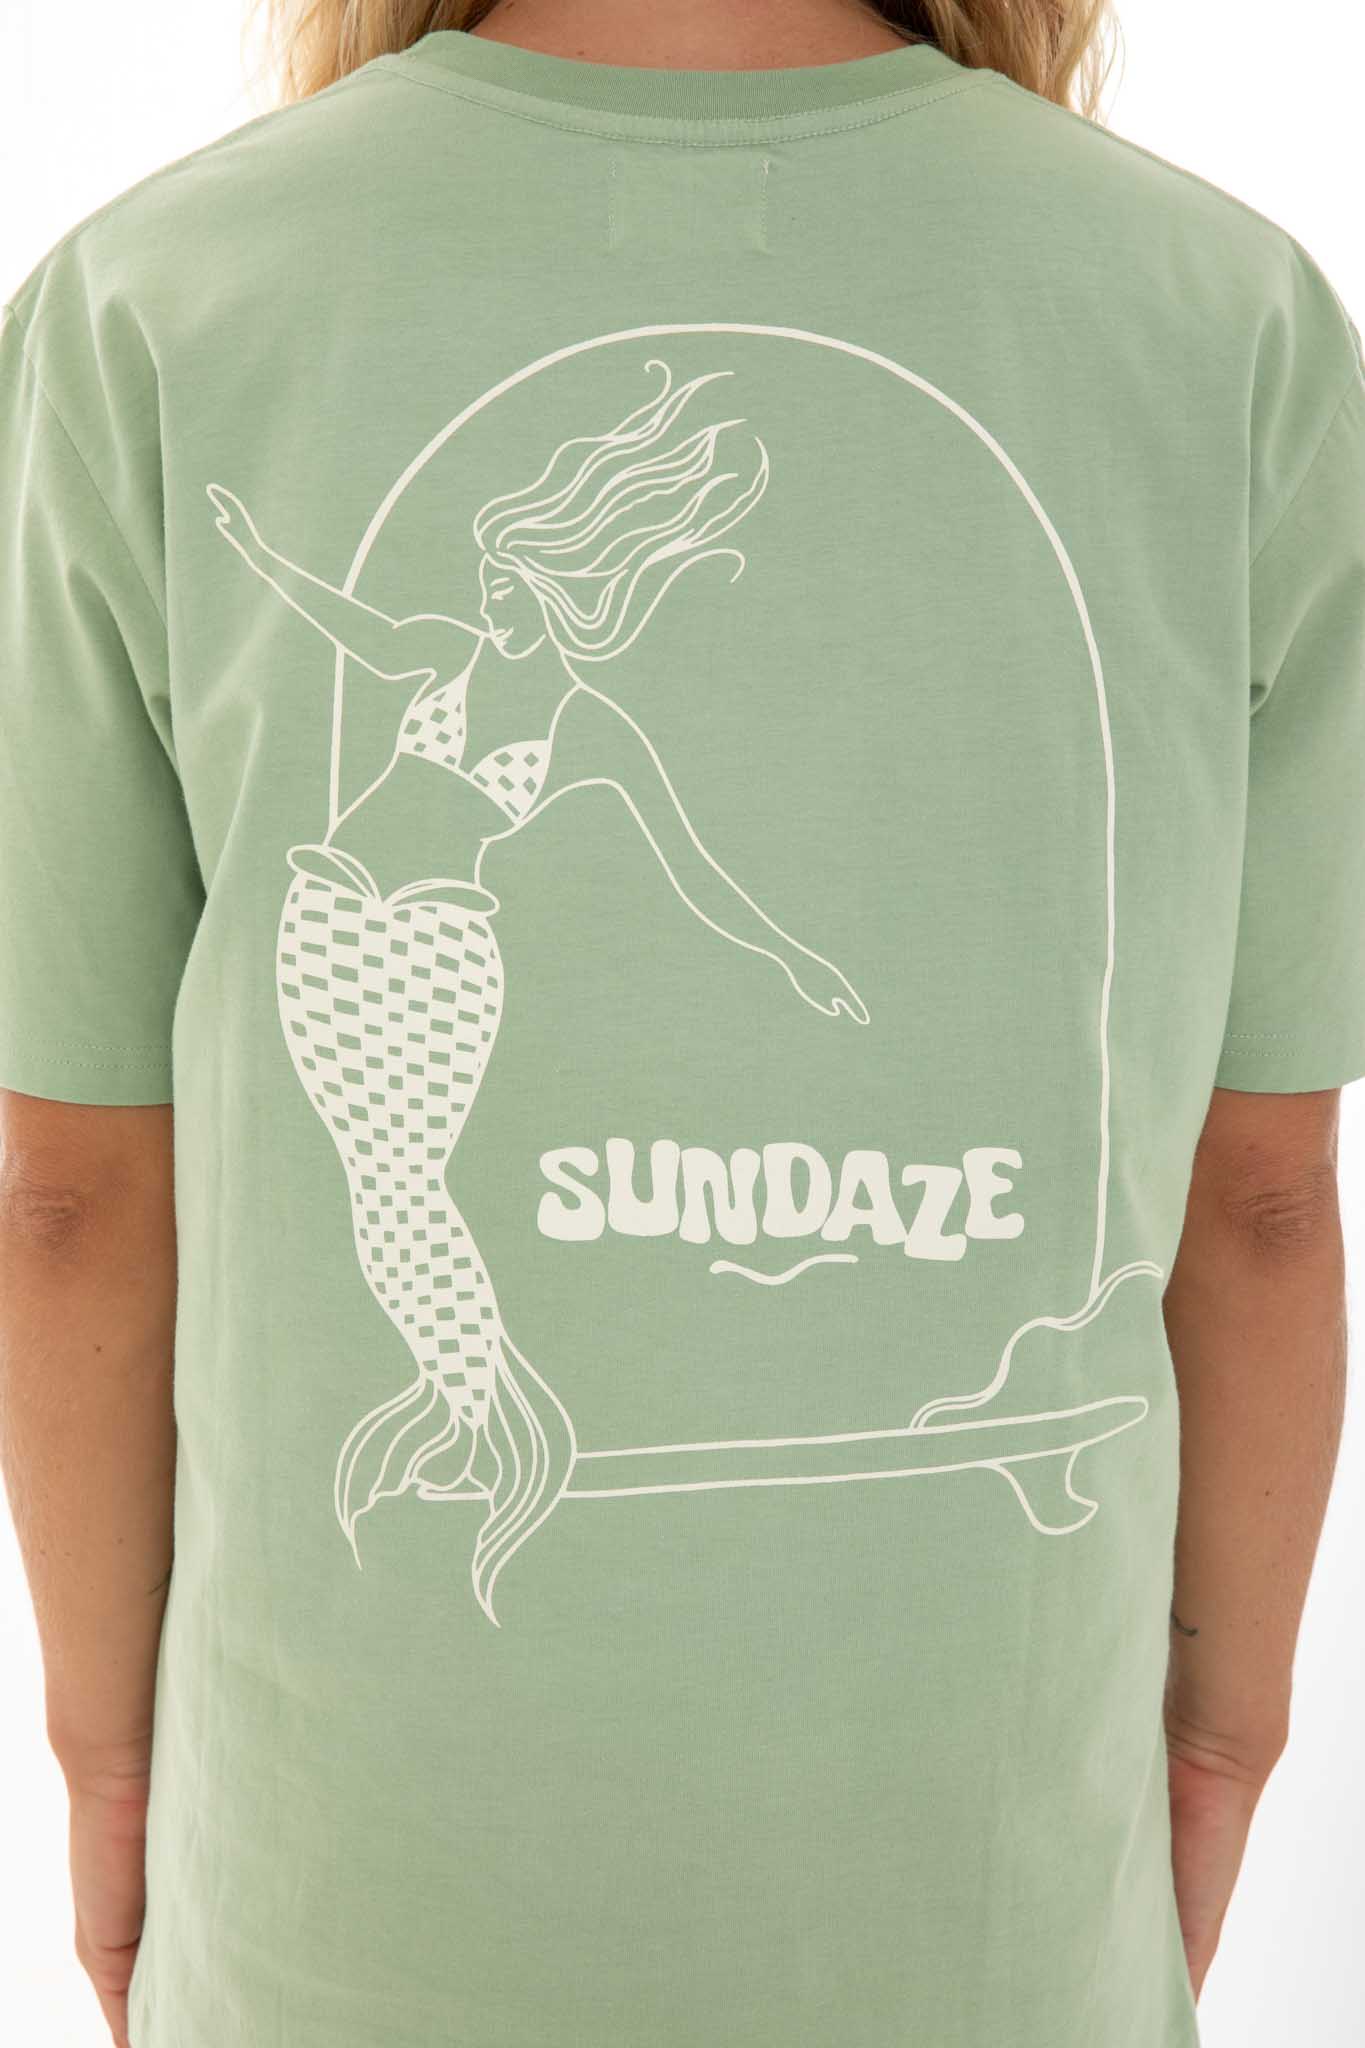 Woman posing, showing the back of her t-shirt wil an illustration of a mermaid on a surfboard